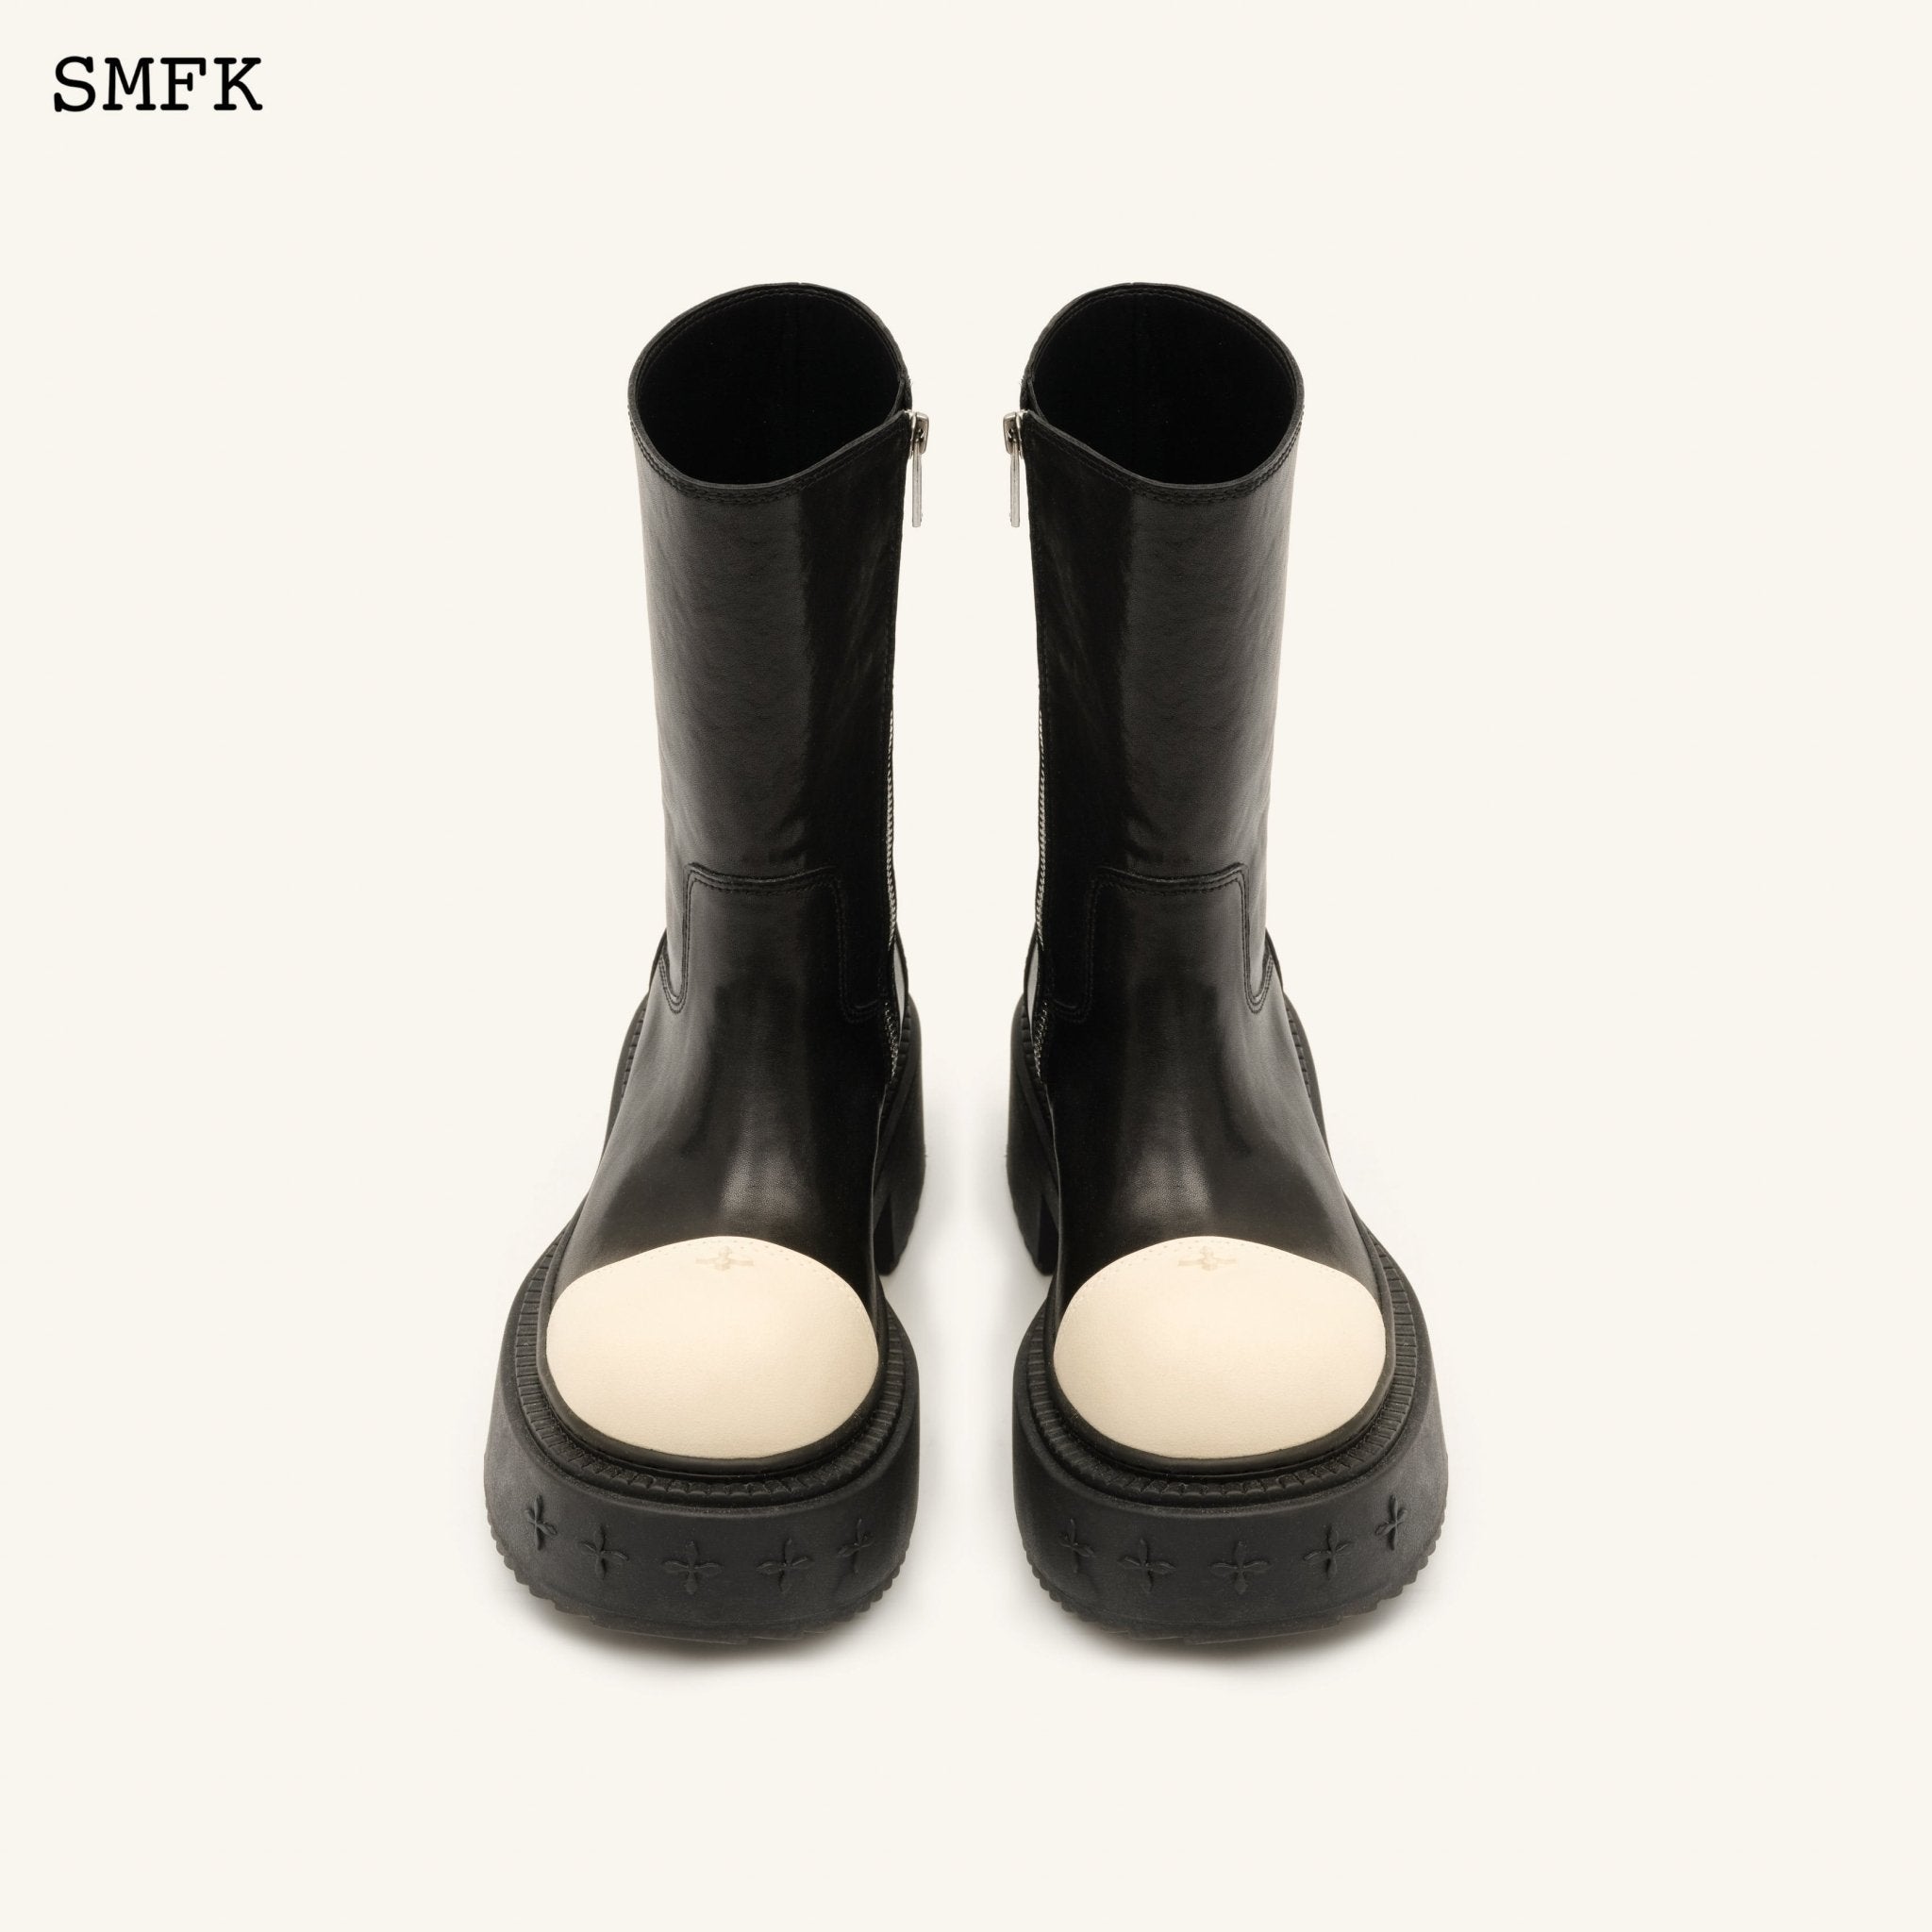 SMFK Compass Rider Low Boots In Black And White | MADA IN CHINA